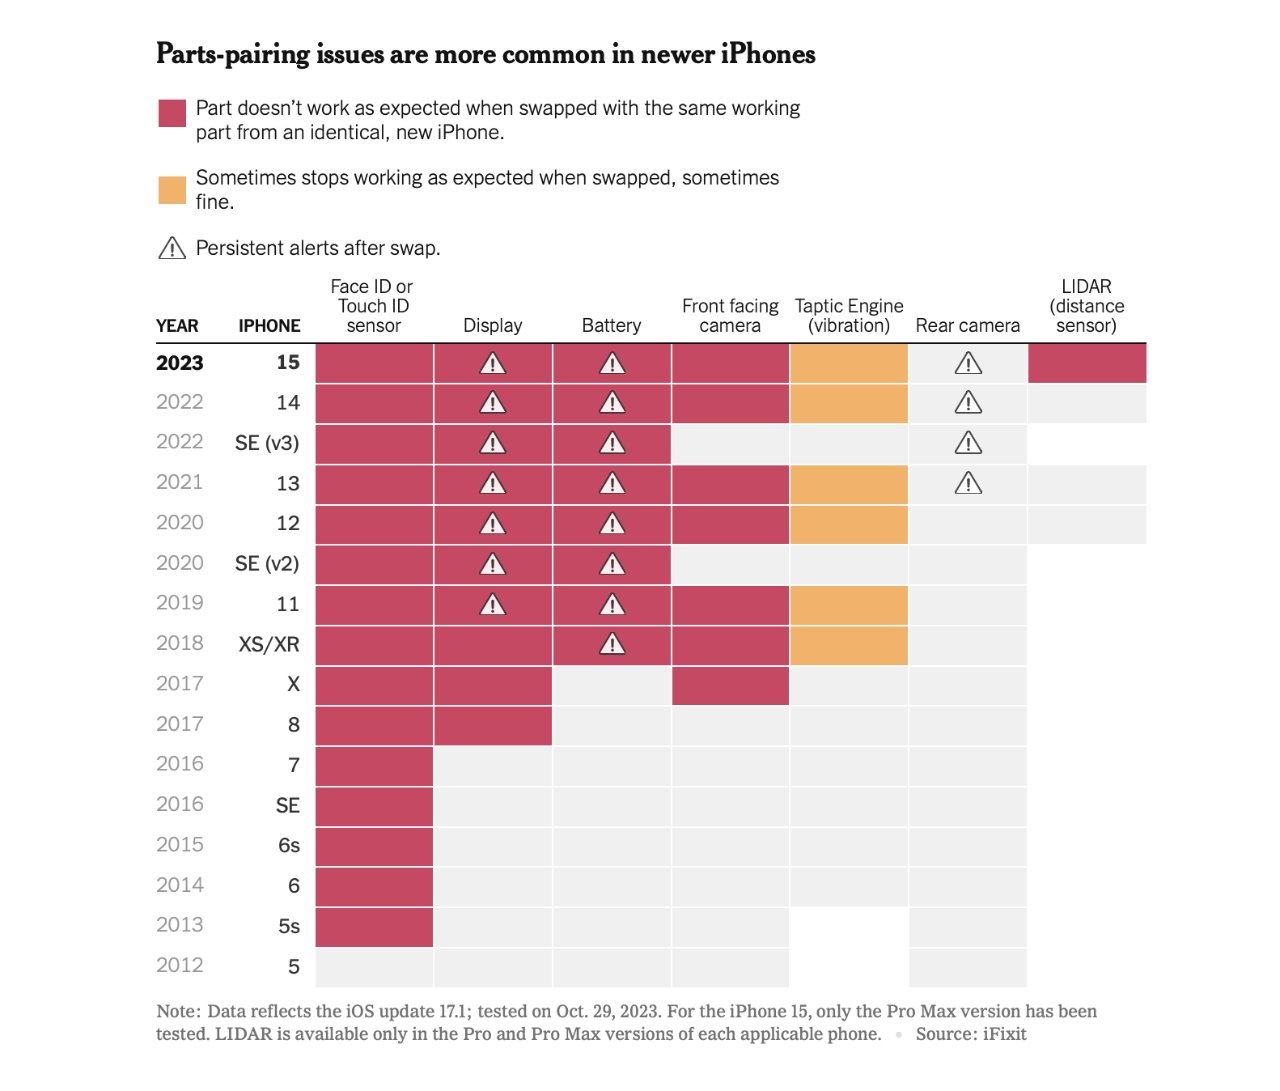 This year's iPhone 15 range repairability compared to previous years (source: NYT)